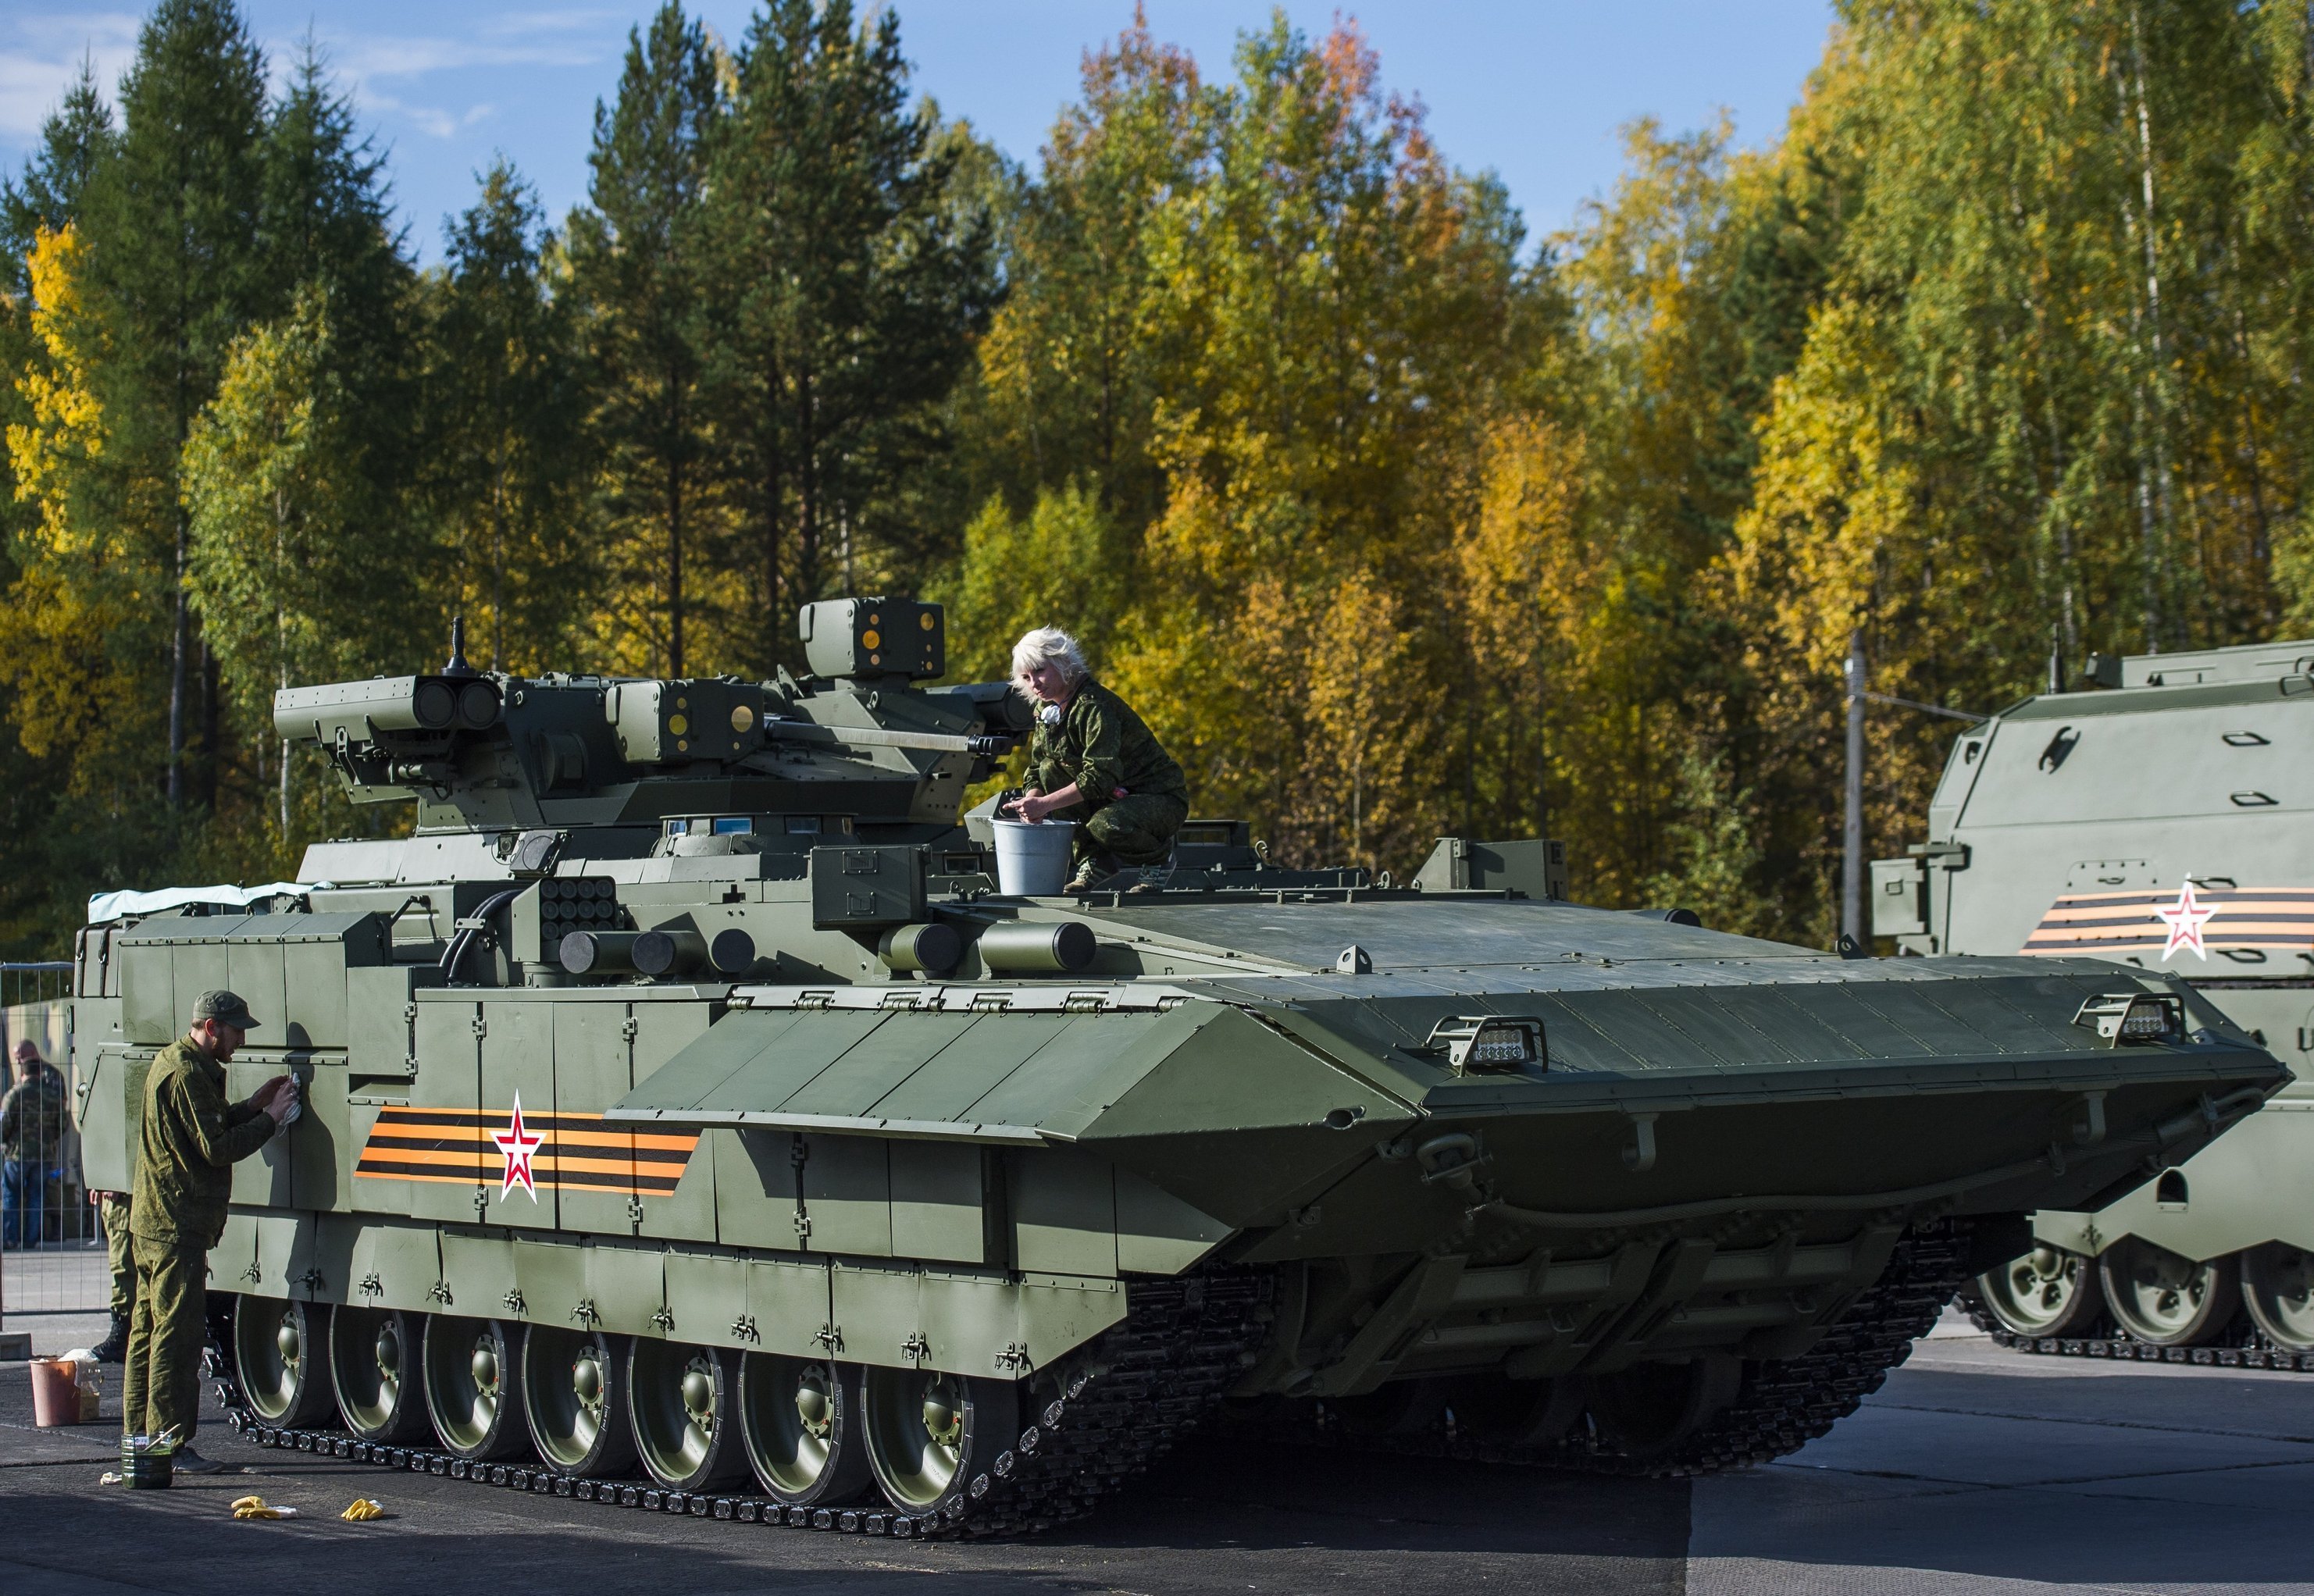 Nizhny Tagil Arms Show Wows Visitors With Advanced Military Hardware ...